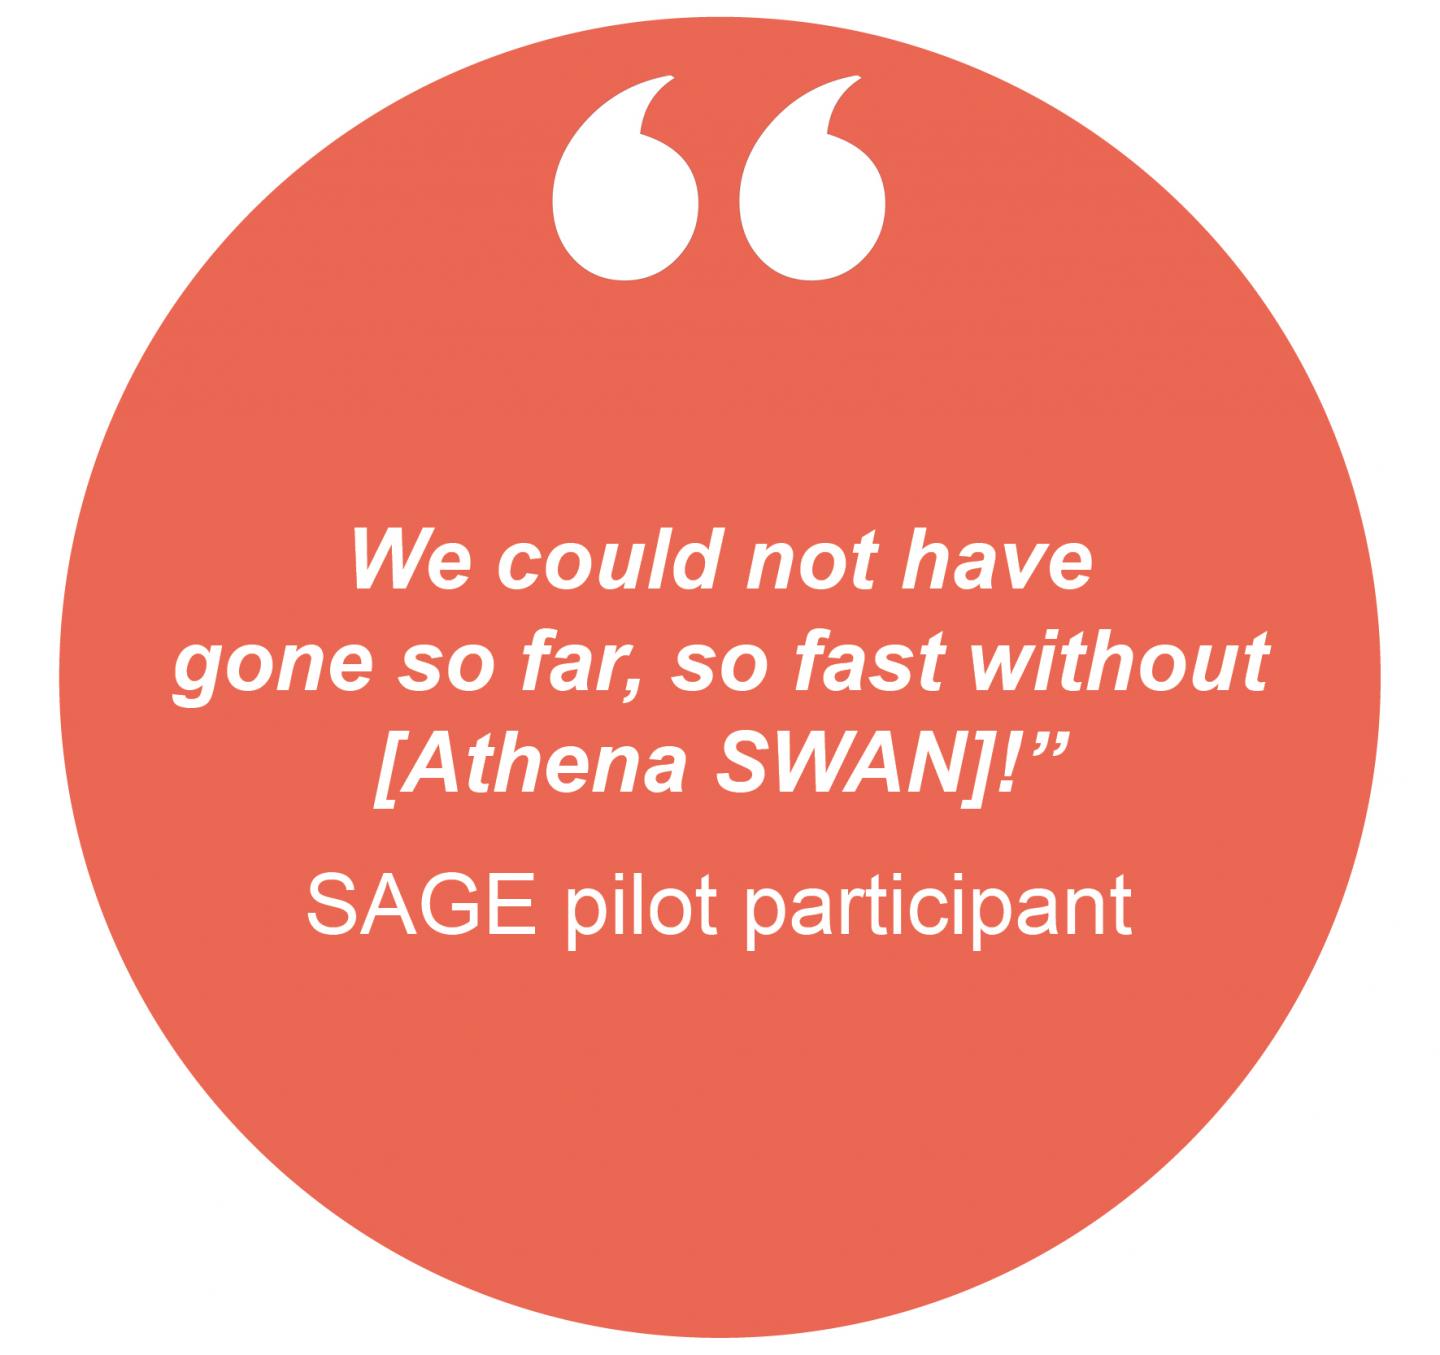 We could not have gone so far, so fast without [Athena SWAN]!” SAGE pilot participant